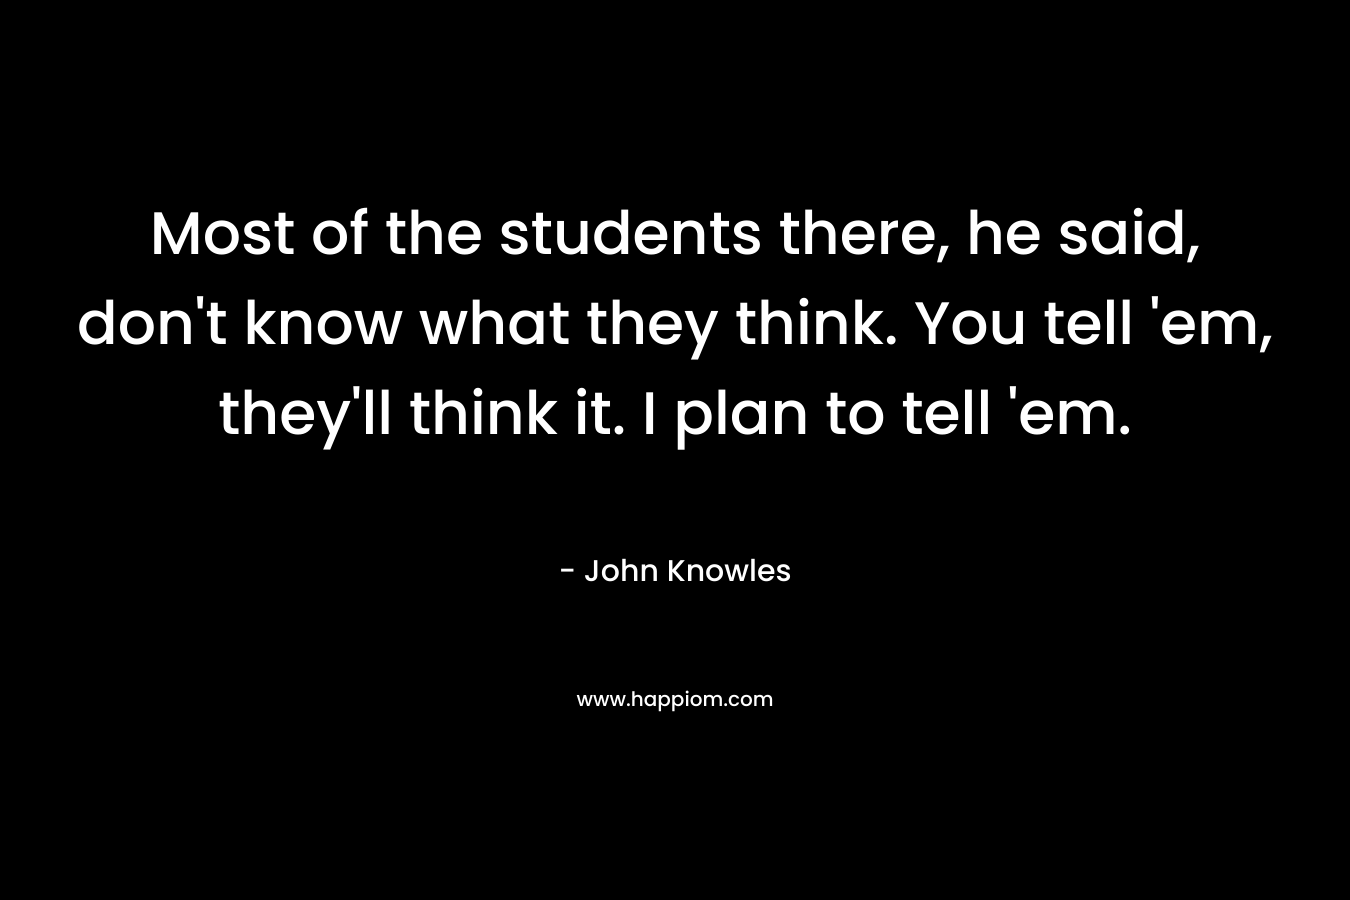 Most of the students there, he said, don’t know what they think. You tell ’em, they’ll think it. I plan to tell ’em. – John Knowles